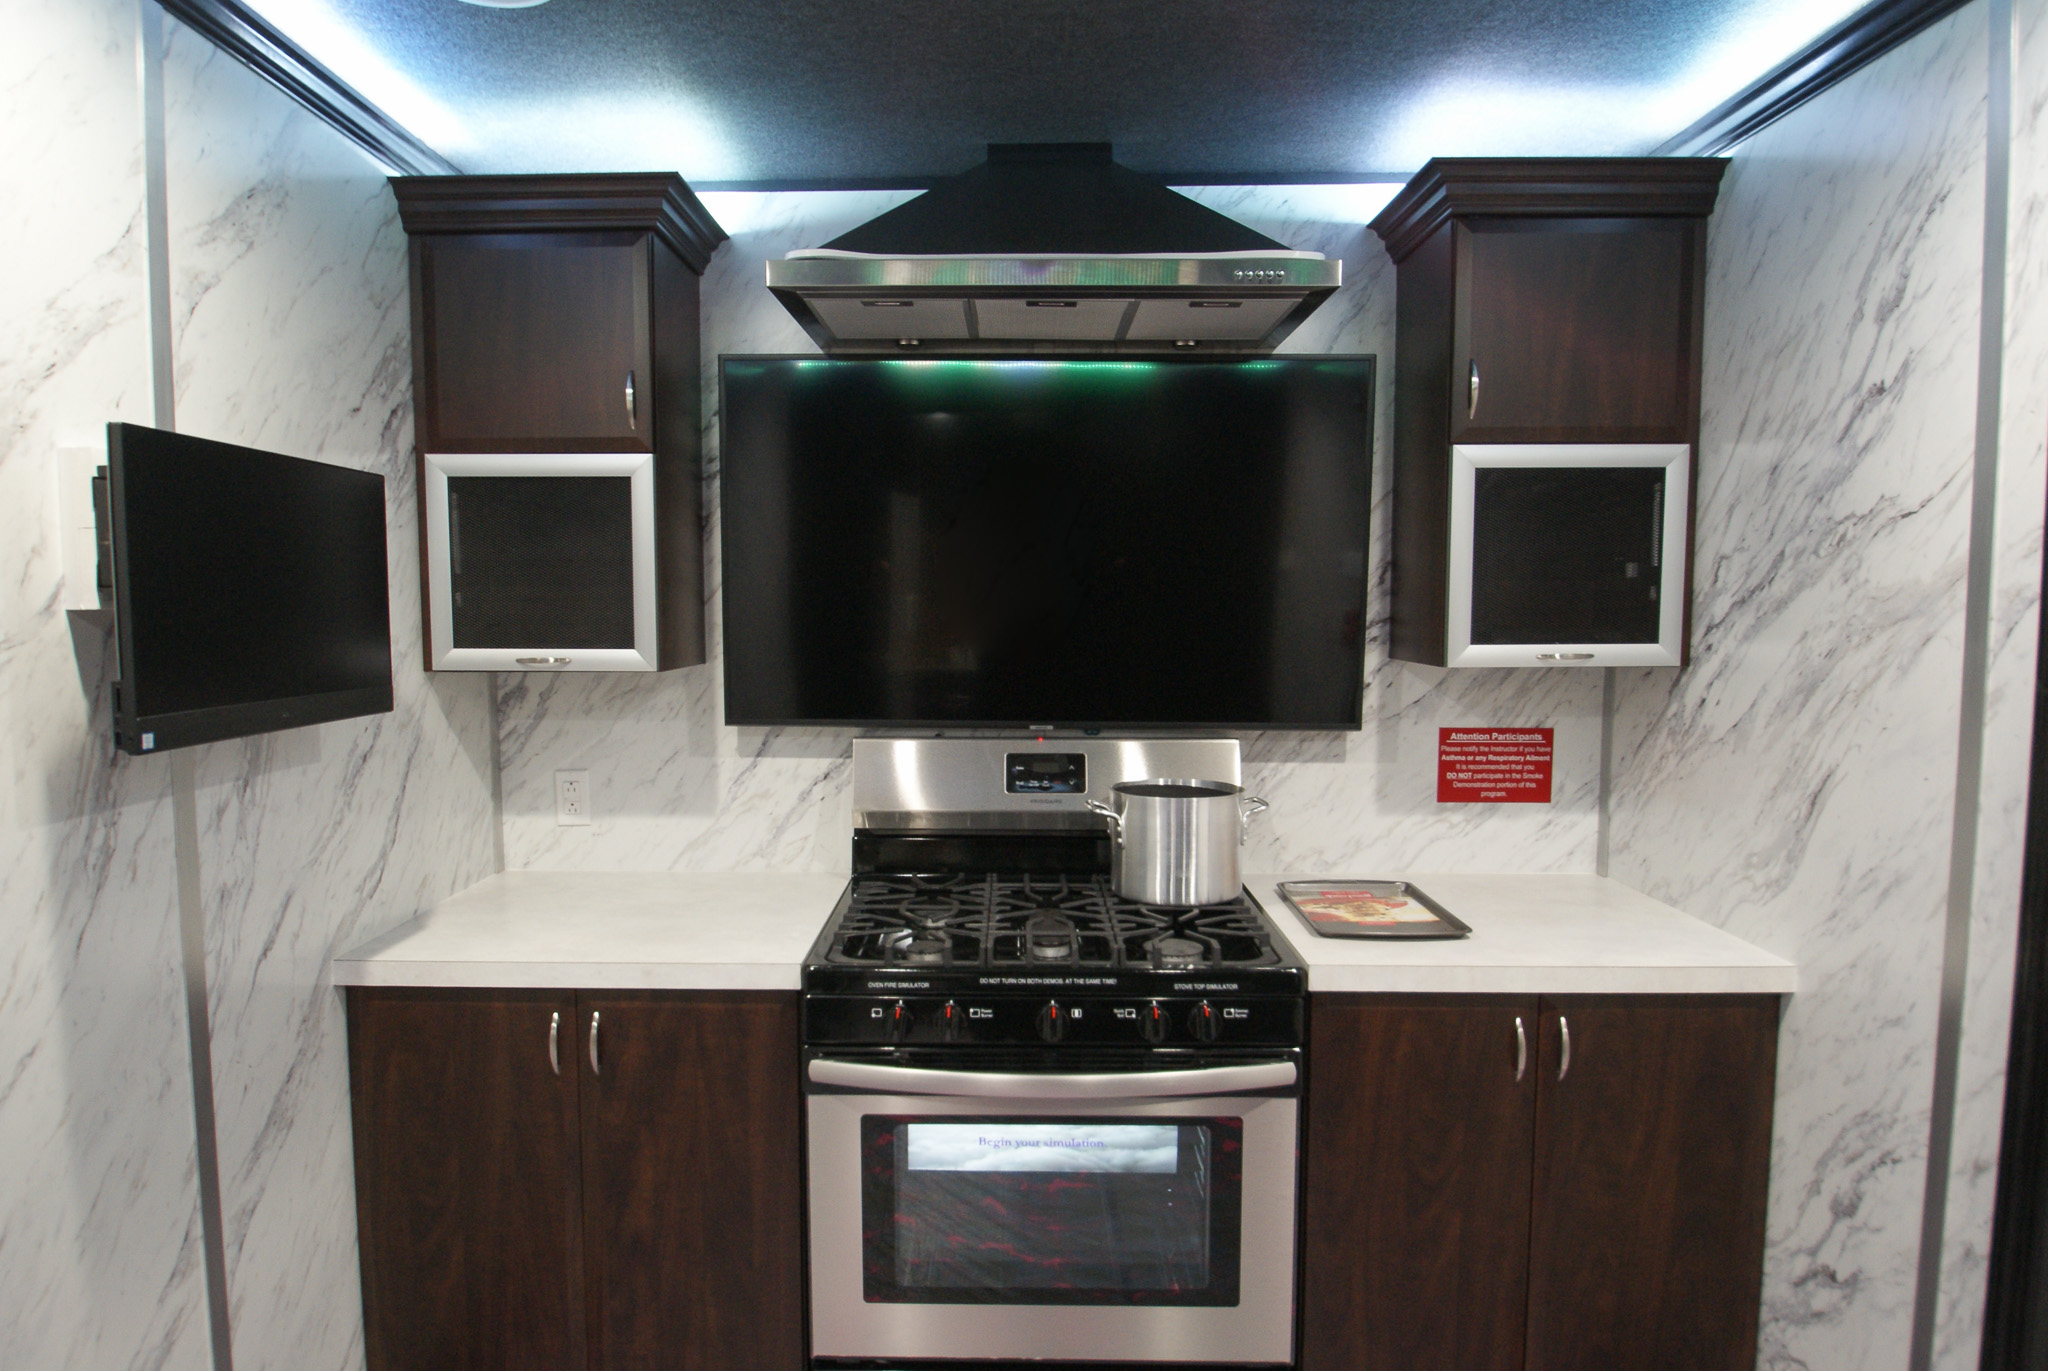 The kitchen stage of the #NextGen FSH made for Travis County, TX.